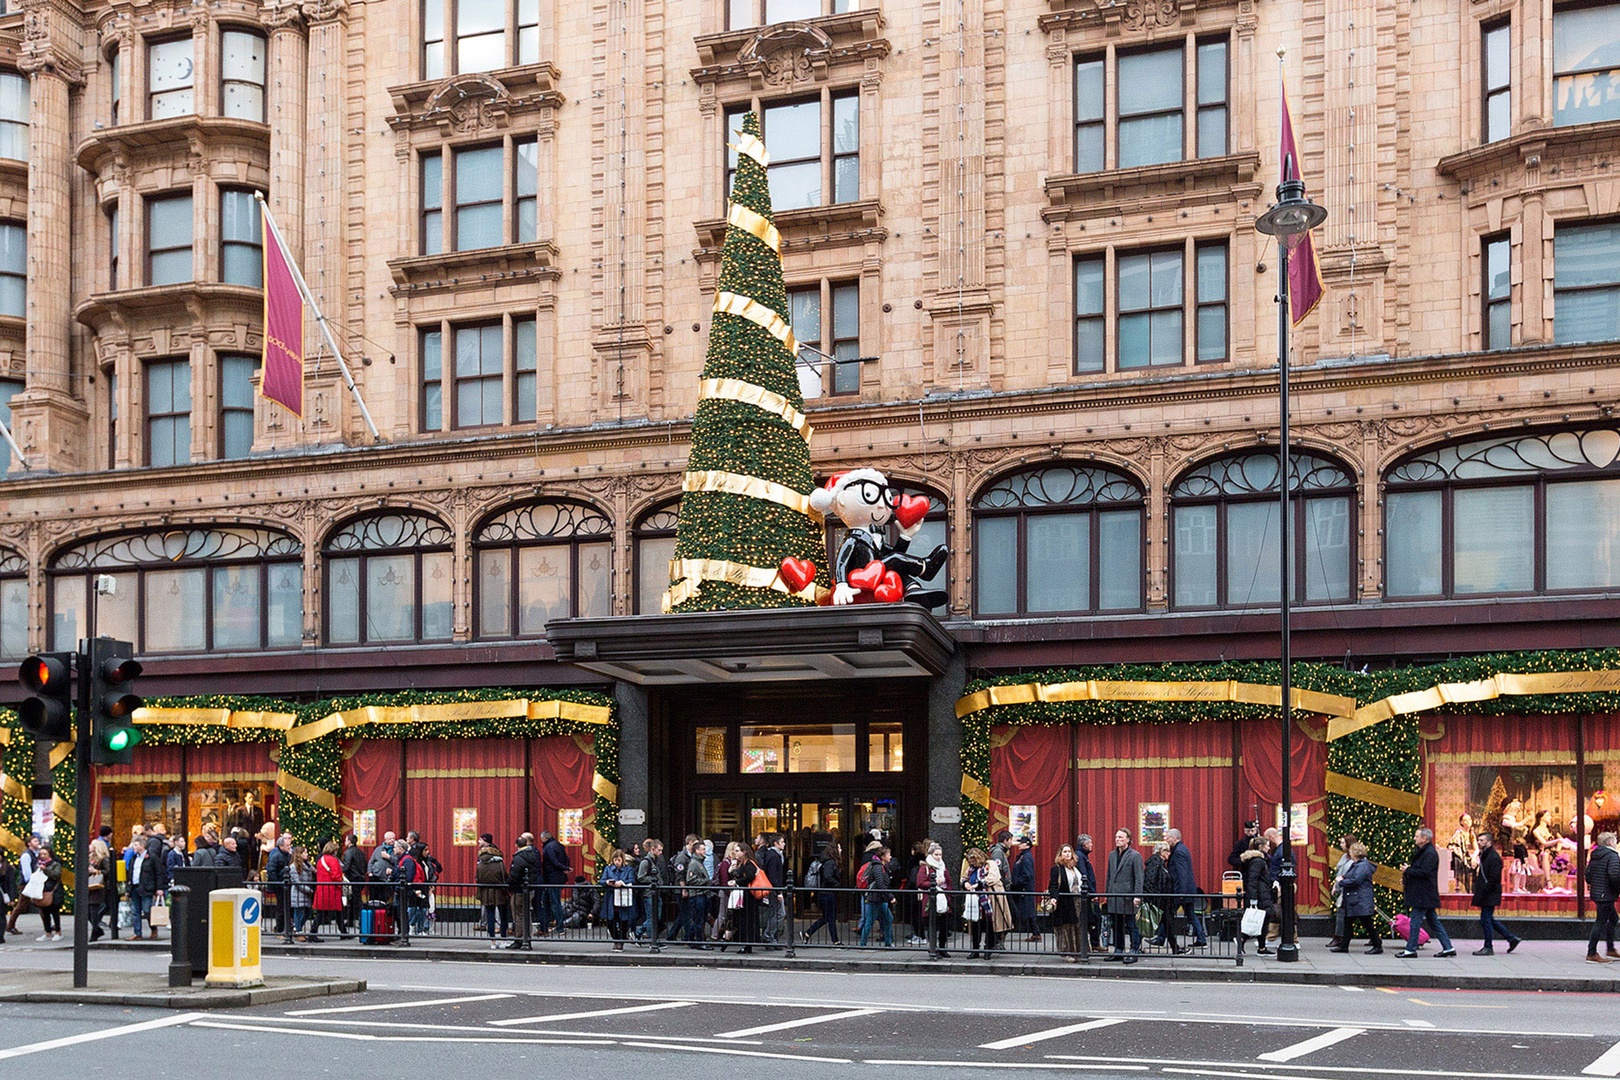 A stone's throw from the famous Harrod's department store